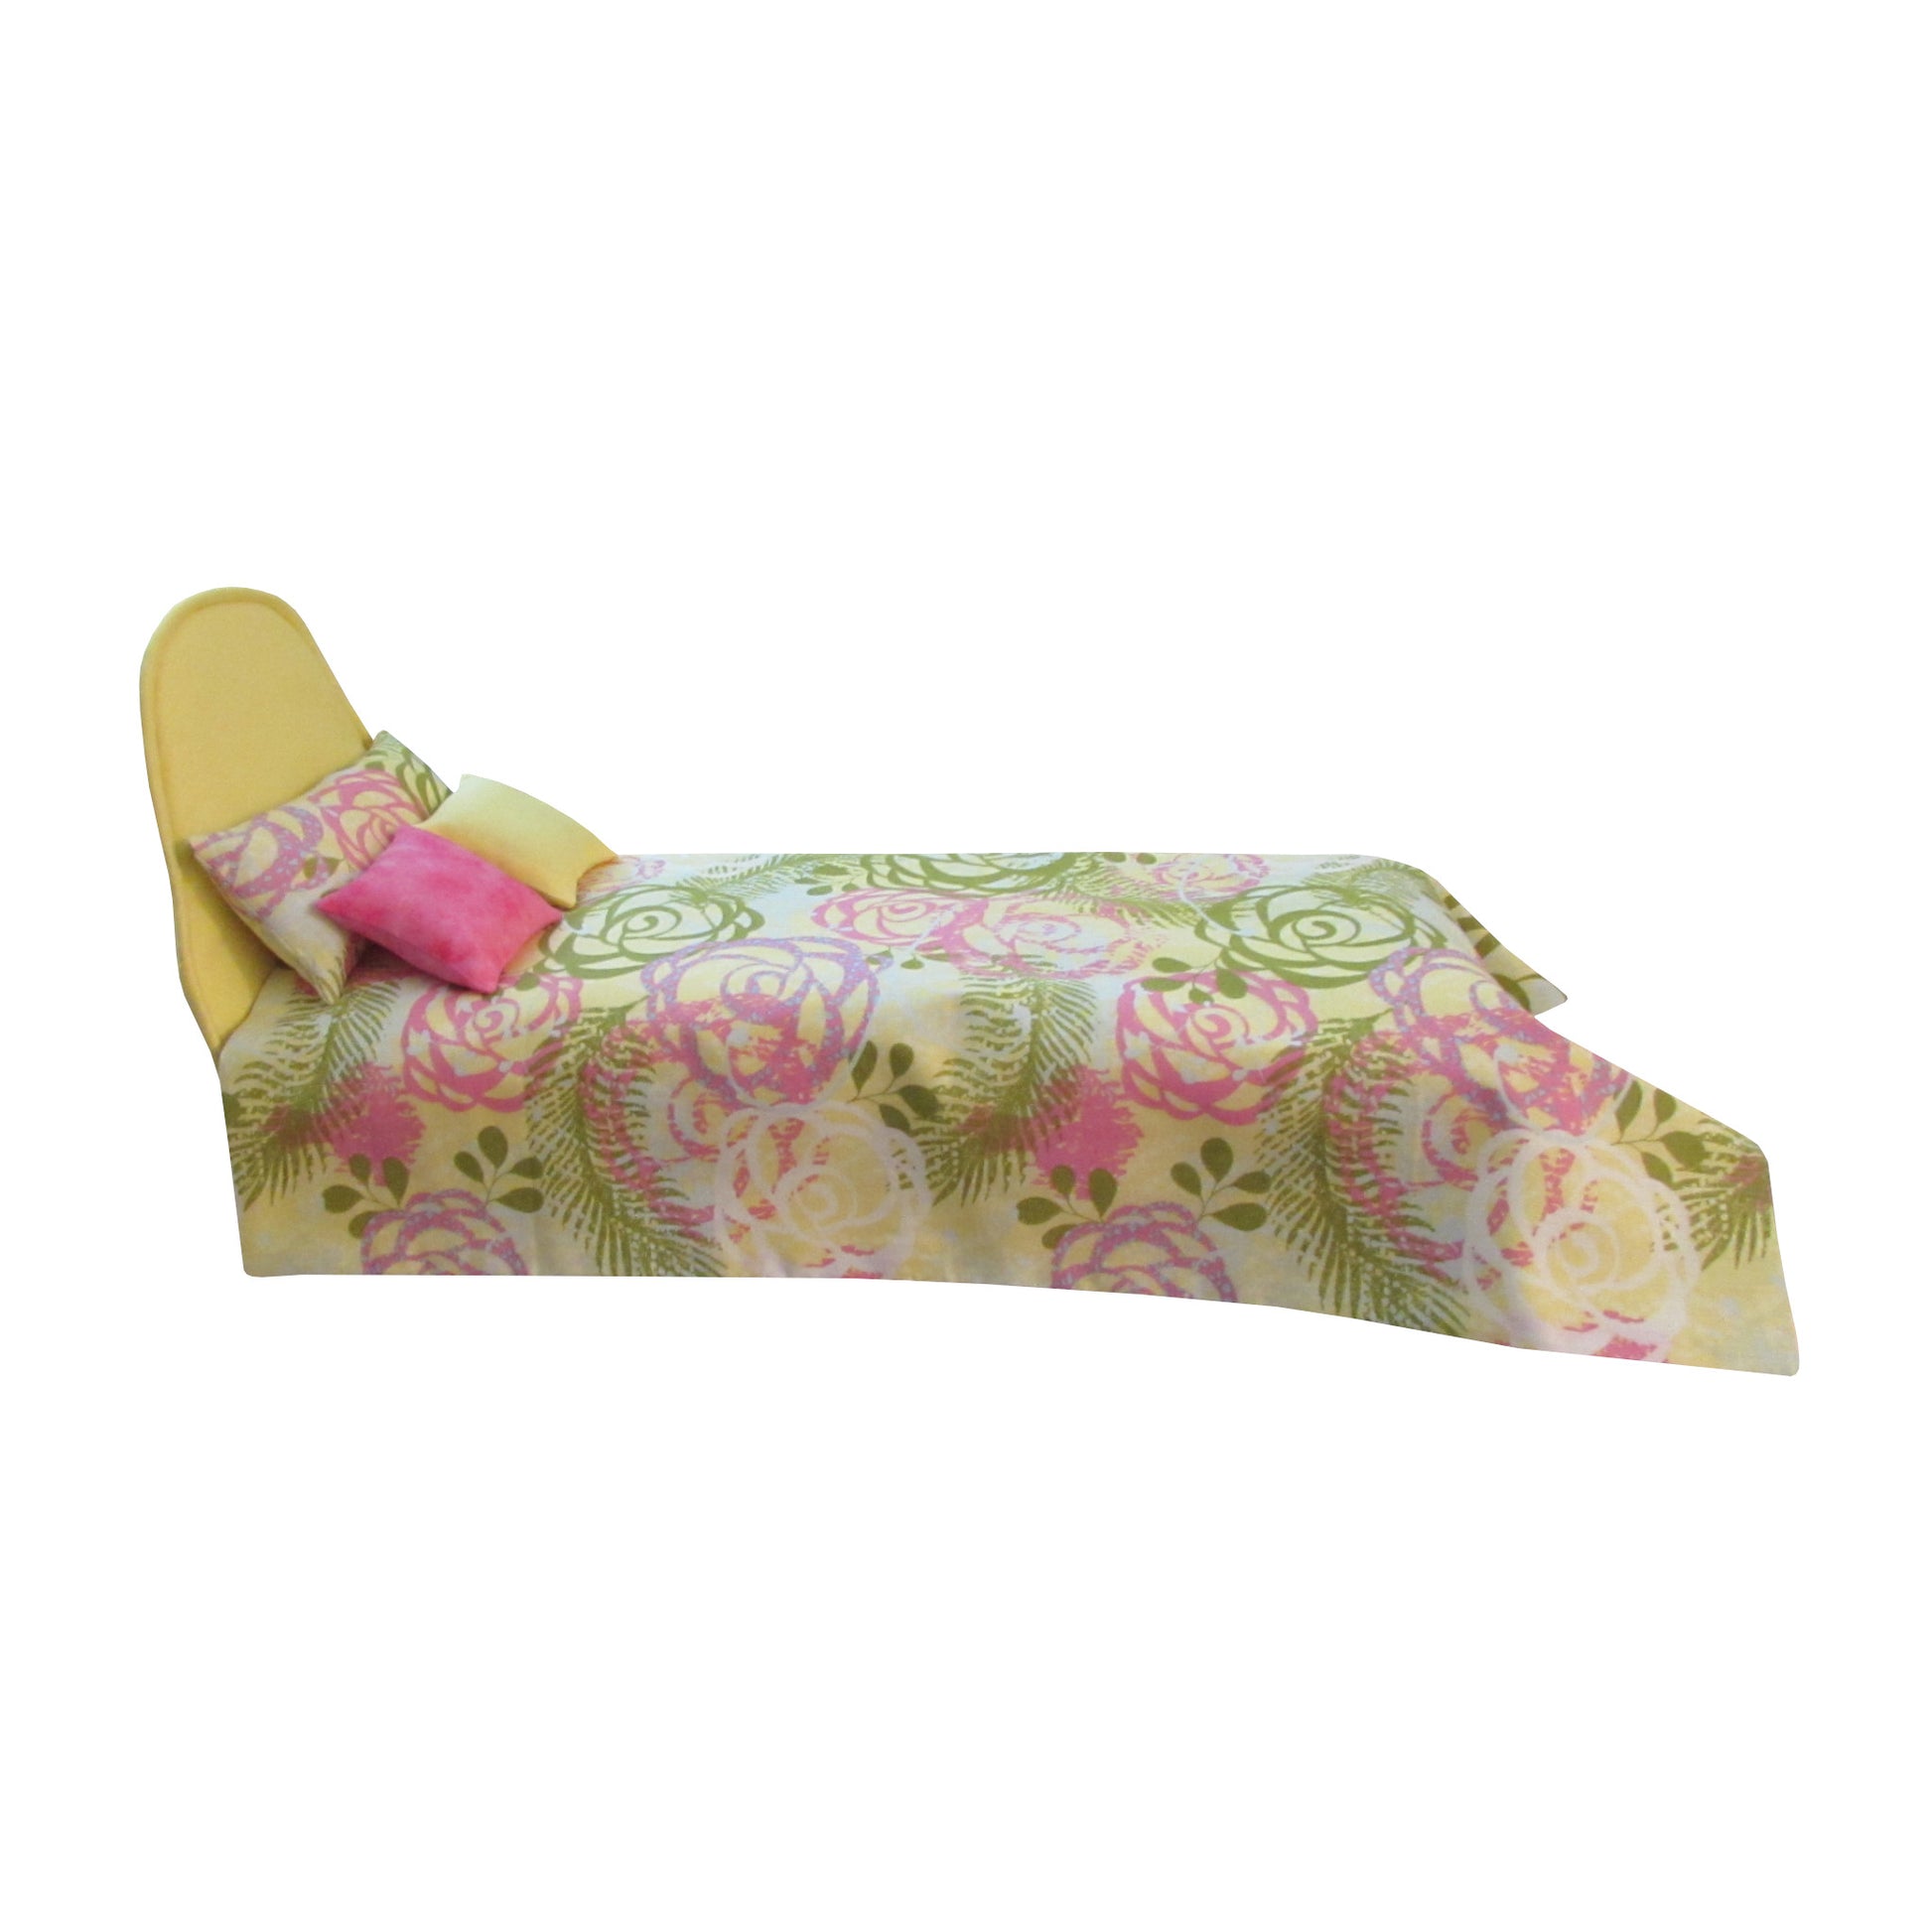 Light Yellow Doll Bed and Floral Bedding for 11.5-inch and 12-inch dolls Side view